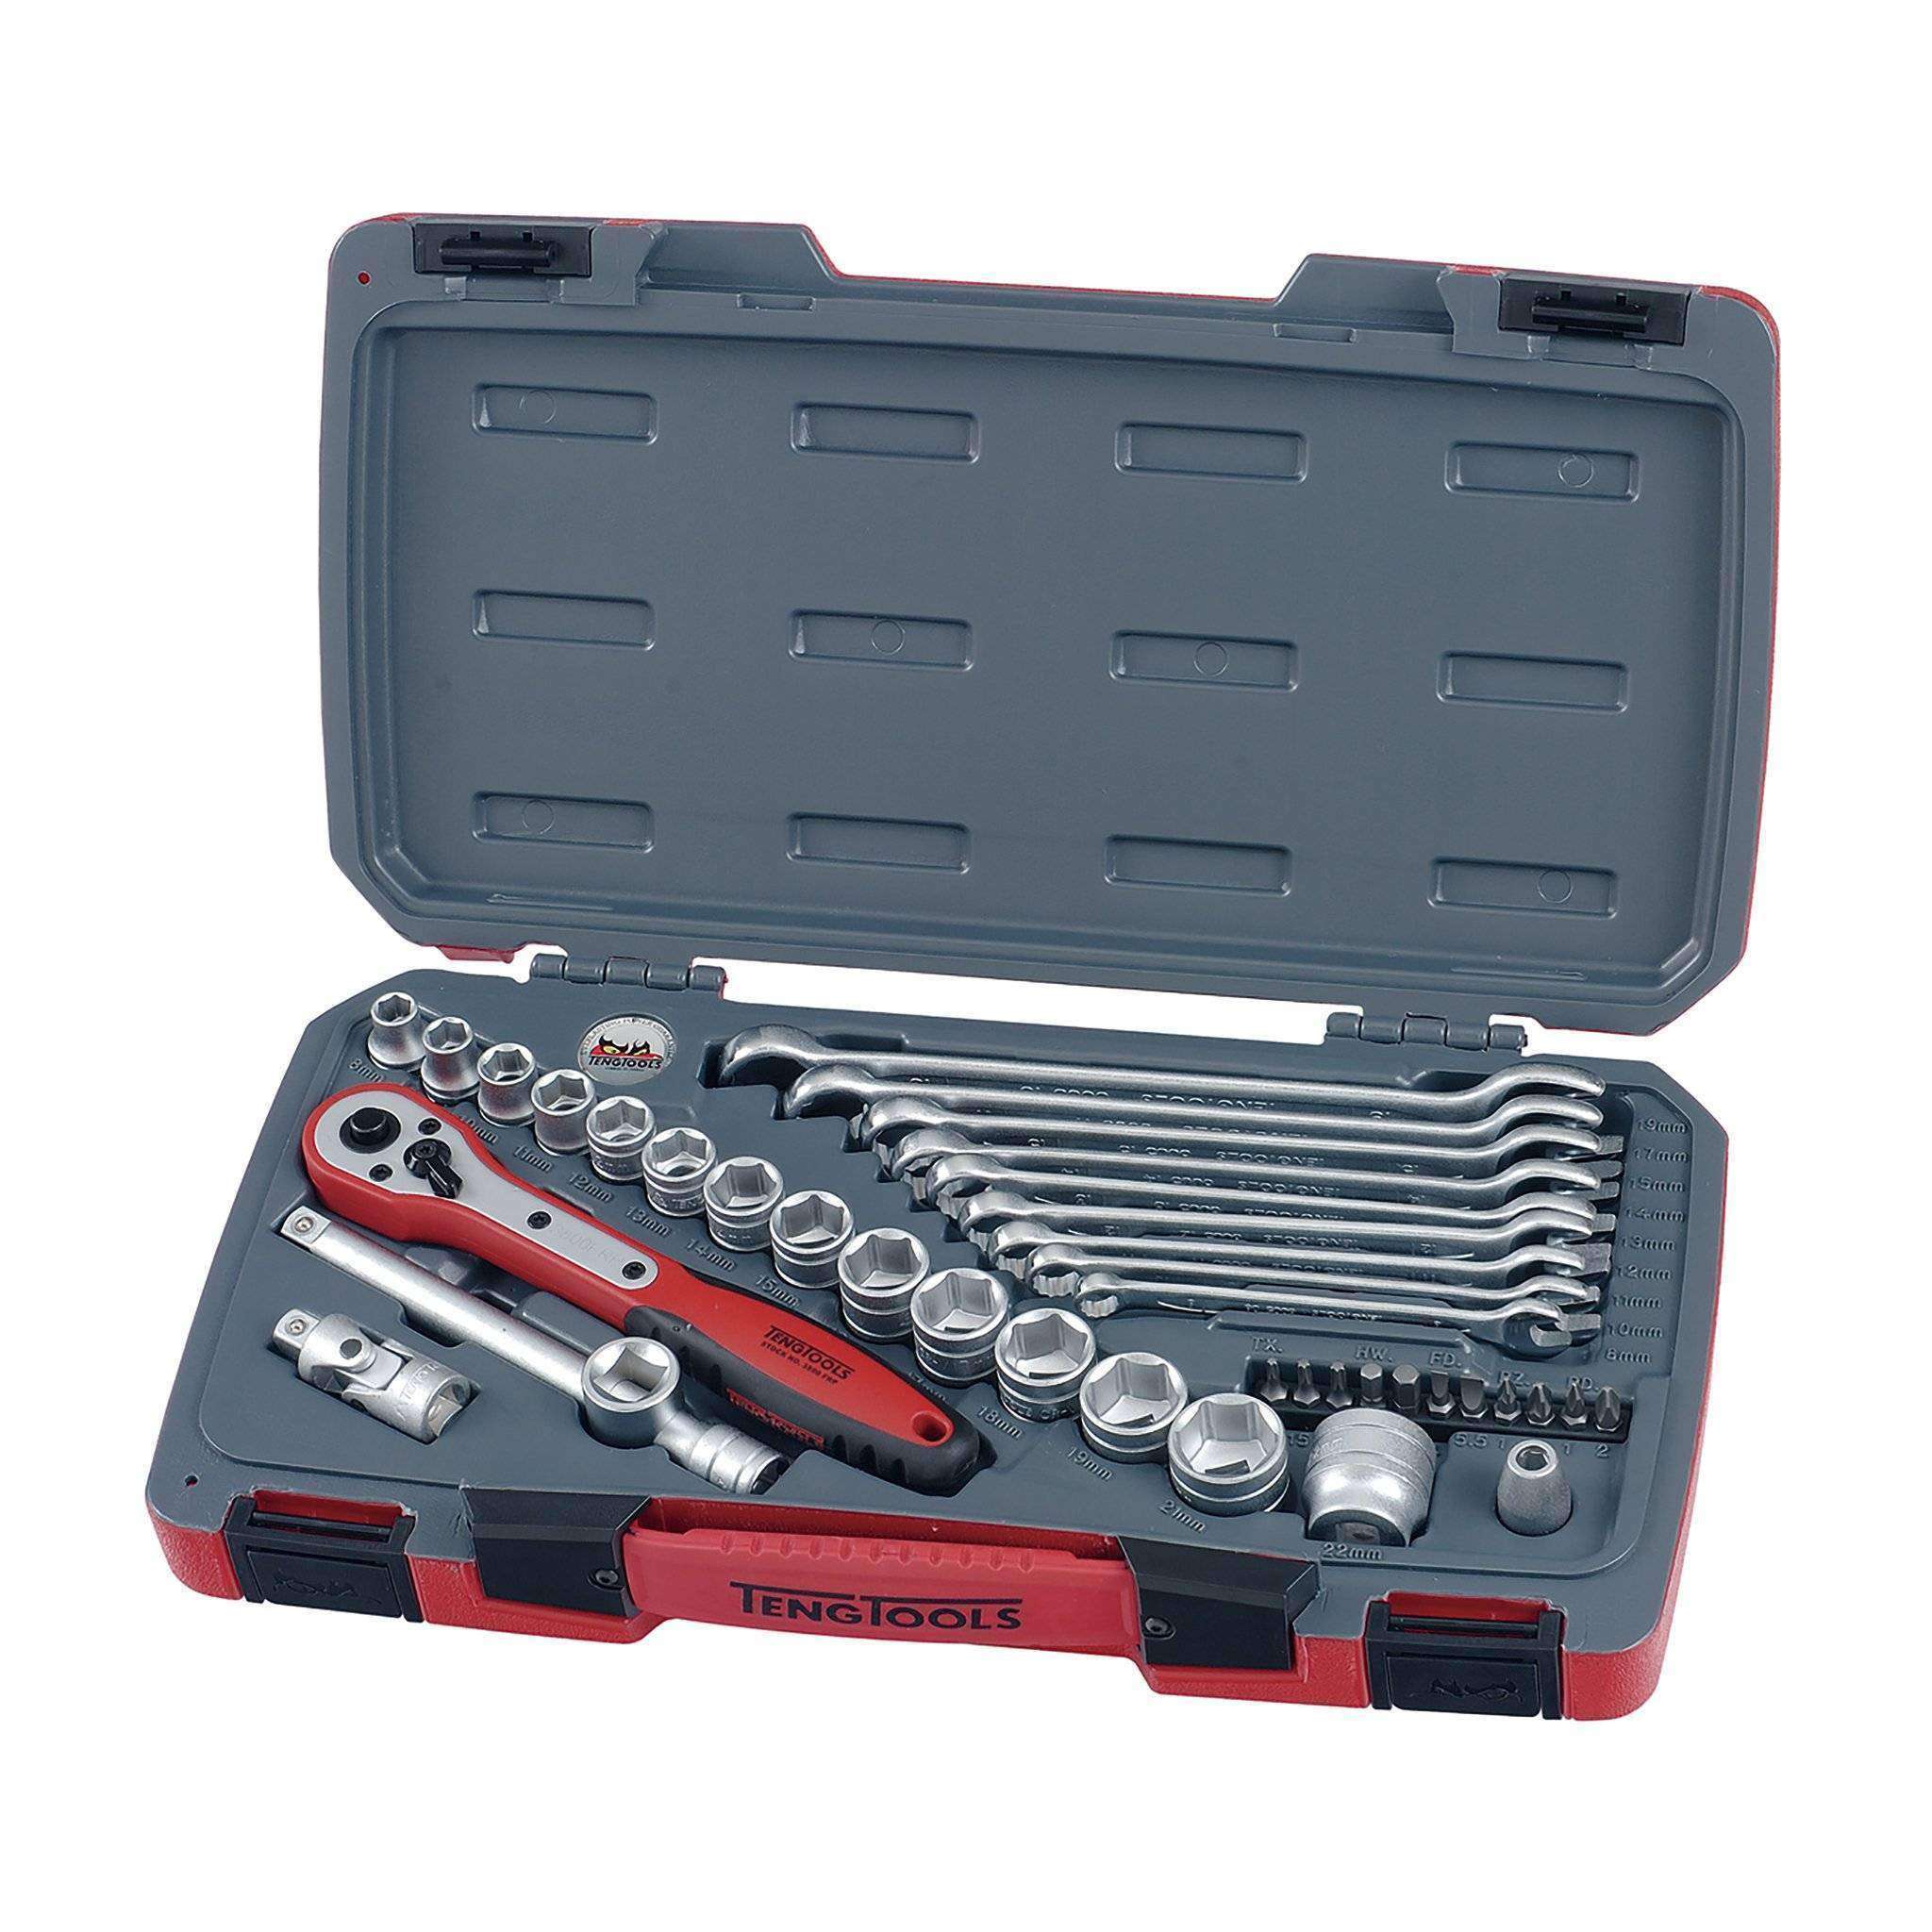 Teng Tools 39 Piece 3/8 Inch Drive 6 Point Metric Regular/Shallow Socket & Wrench Set - T3840